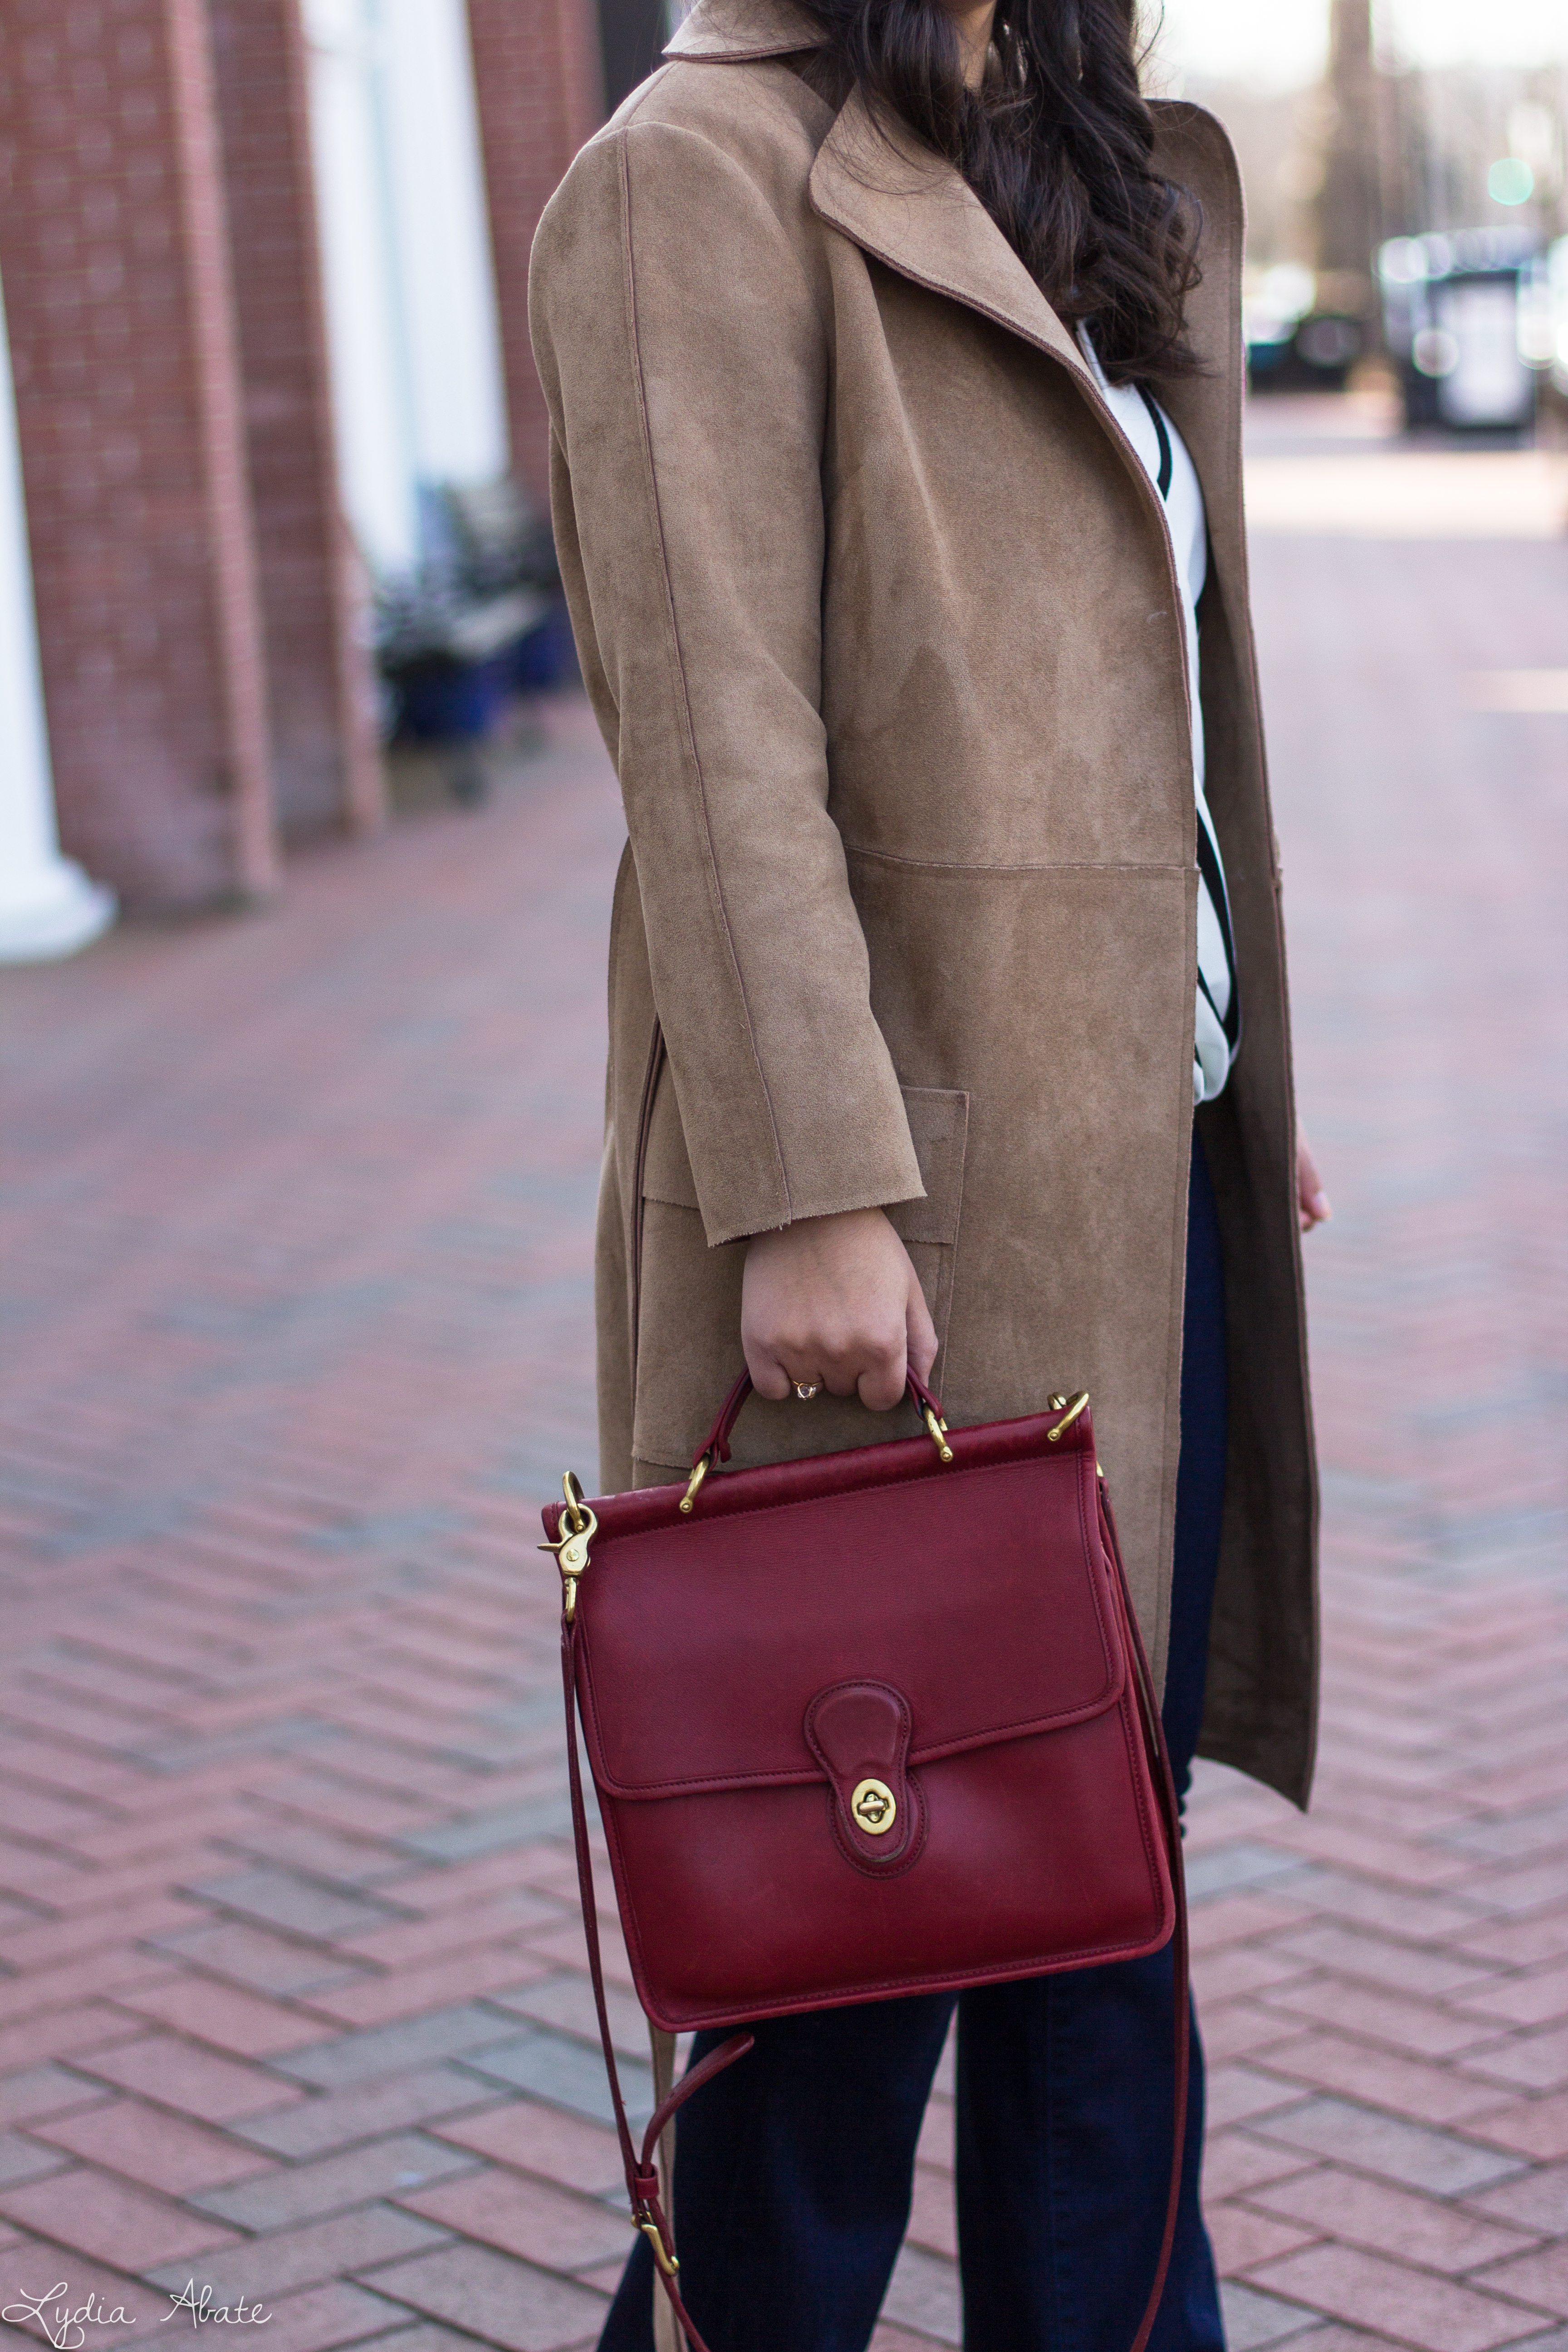 suede trench coat, wide leg jeans, striped wrap top, red coach bag, beret-10.jpg